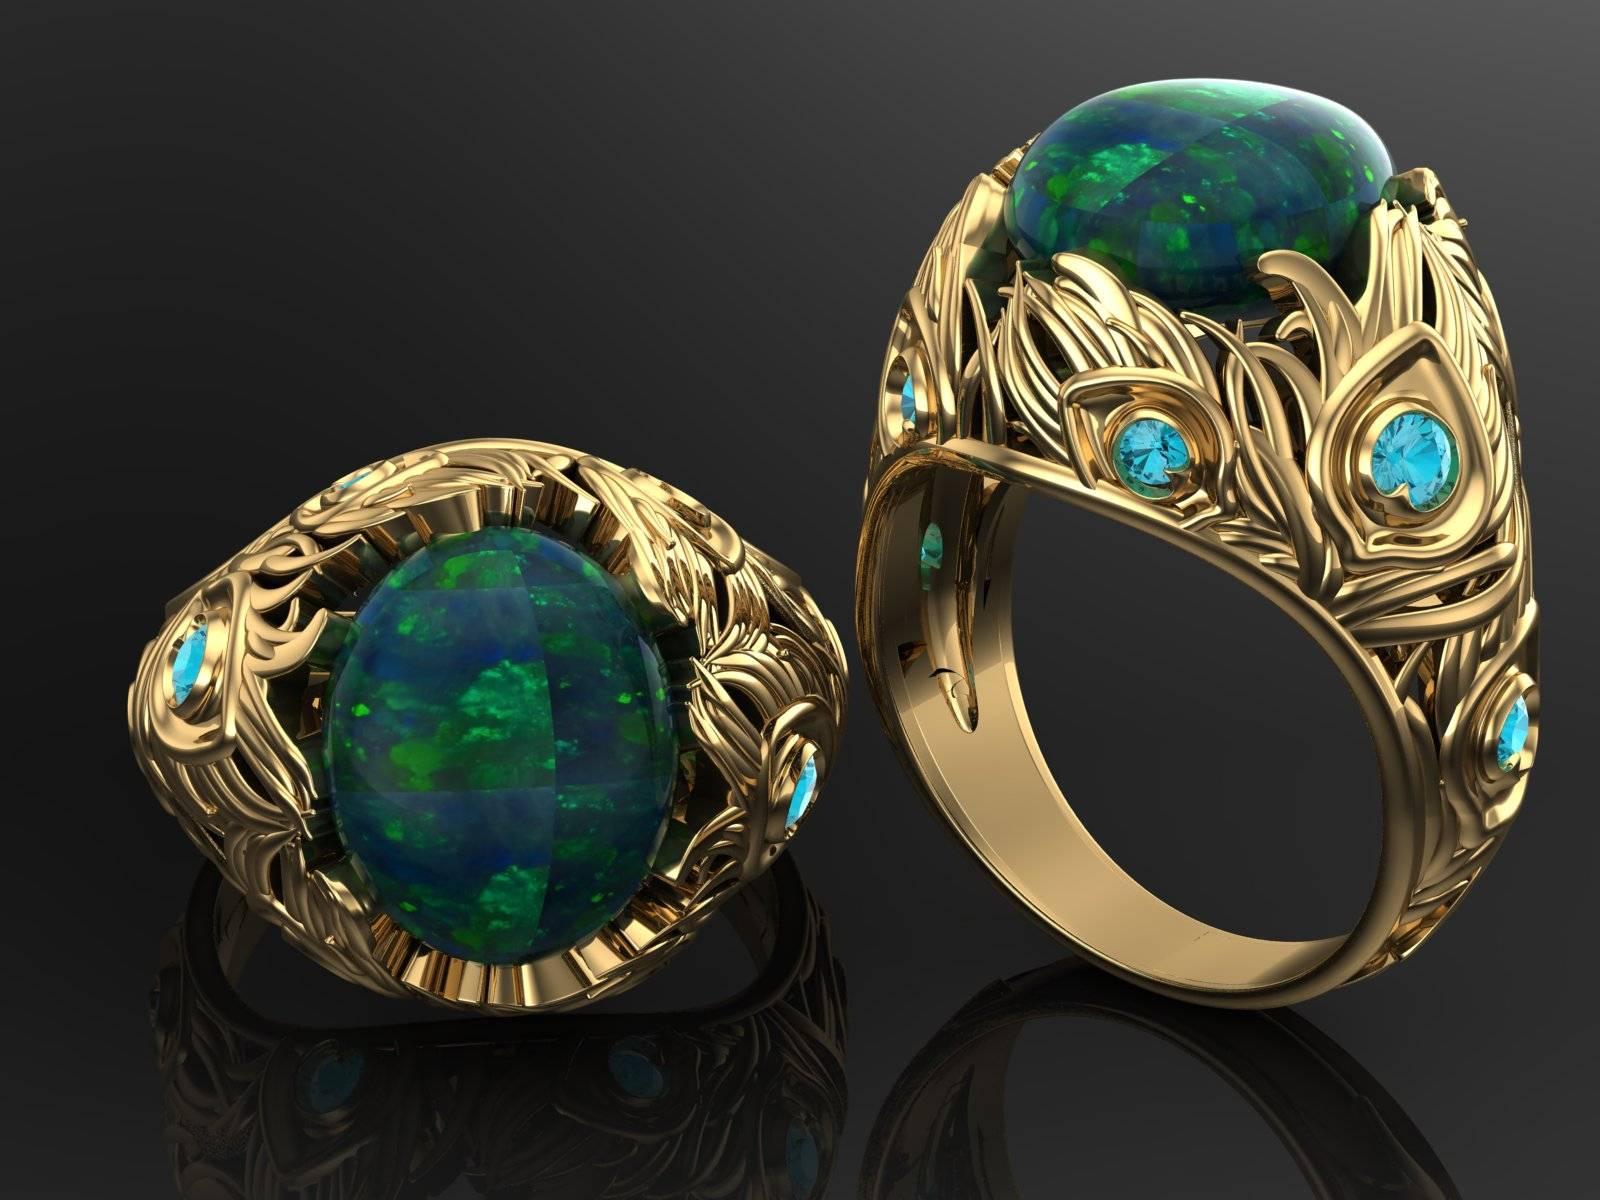 Oval Cut 3.82 Carat Black Opal with Paraiba Tourmaline Peacock Ring in 18K Yellow Gold